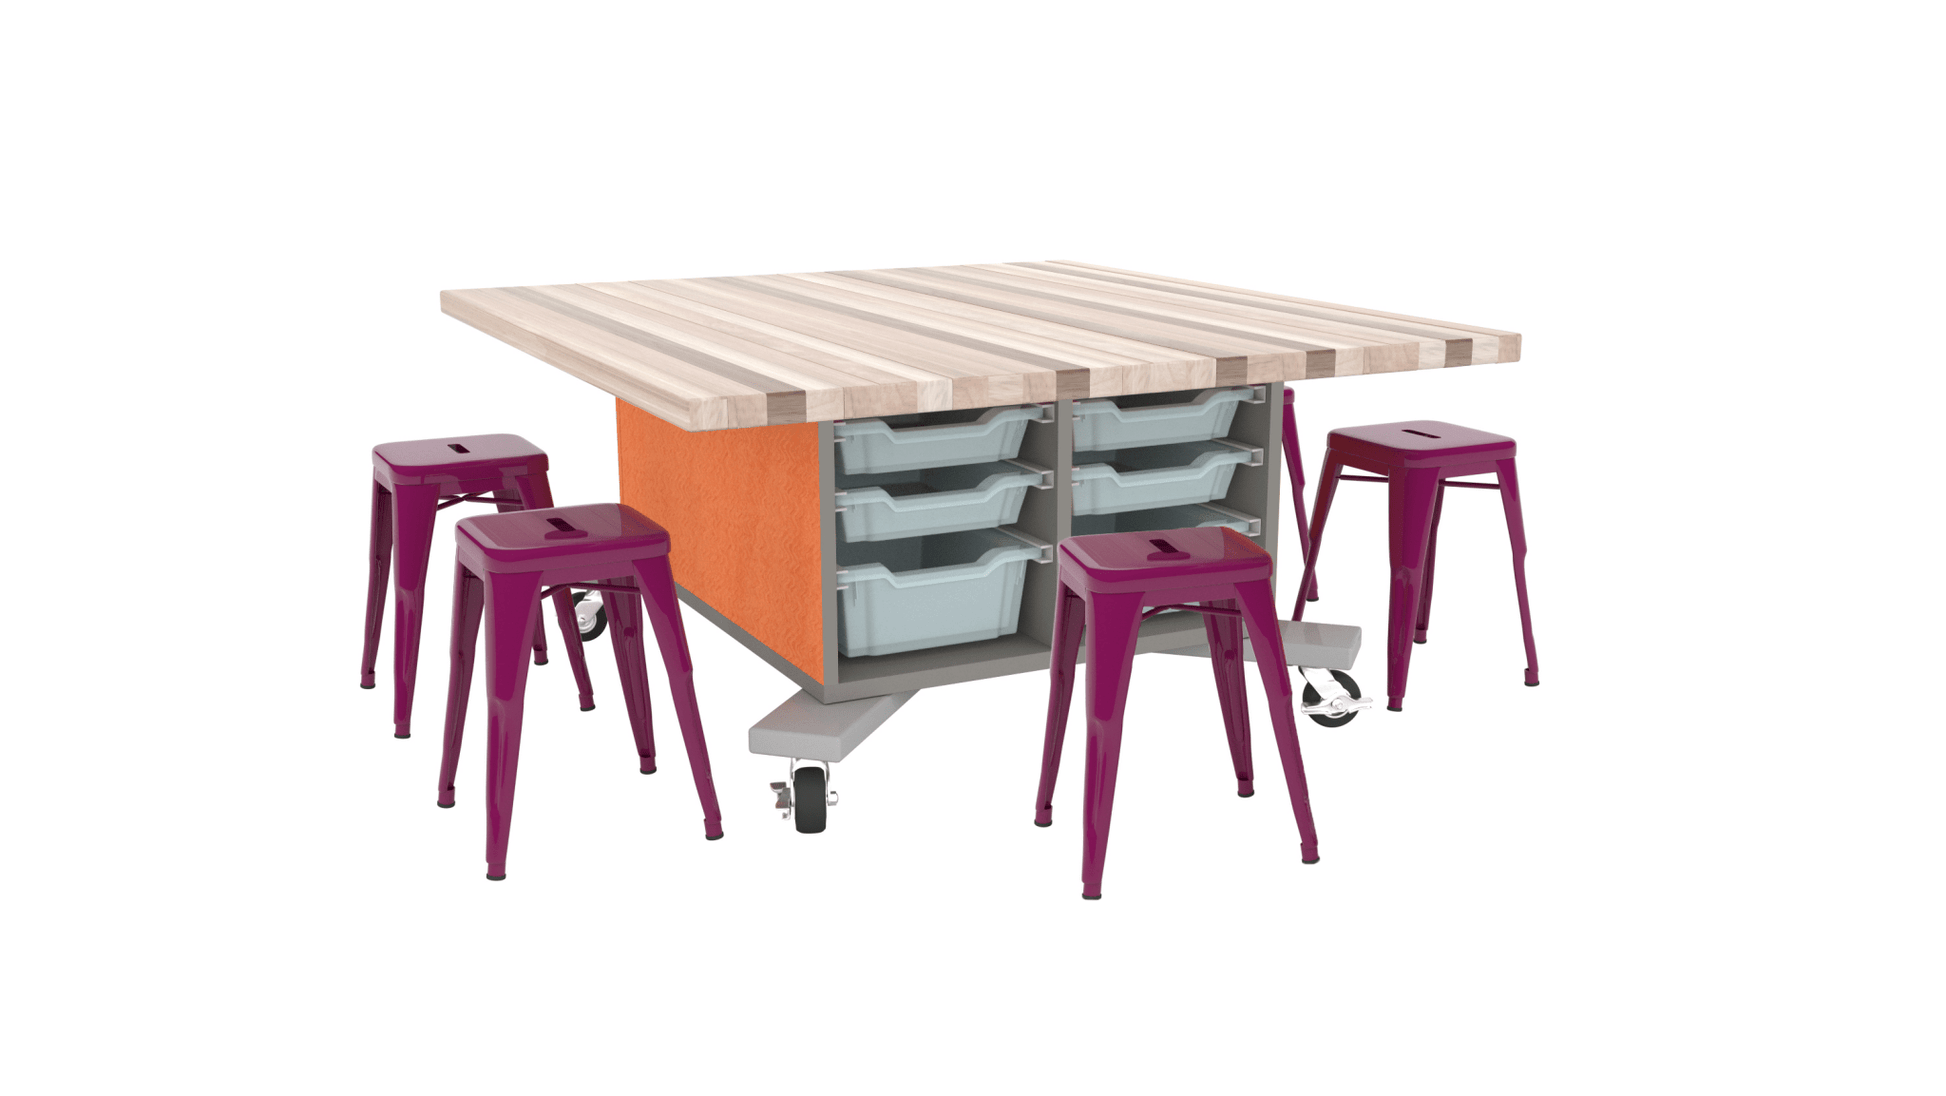 CEF Hideaway Storage Table 26"H - Double Sided 12 Bin Storage Cart and a Solid Maple Butcher Block Top 49"W x 60"D with 6 Metal Stools Included - SchoolOutlet